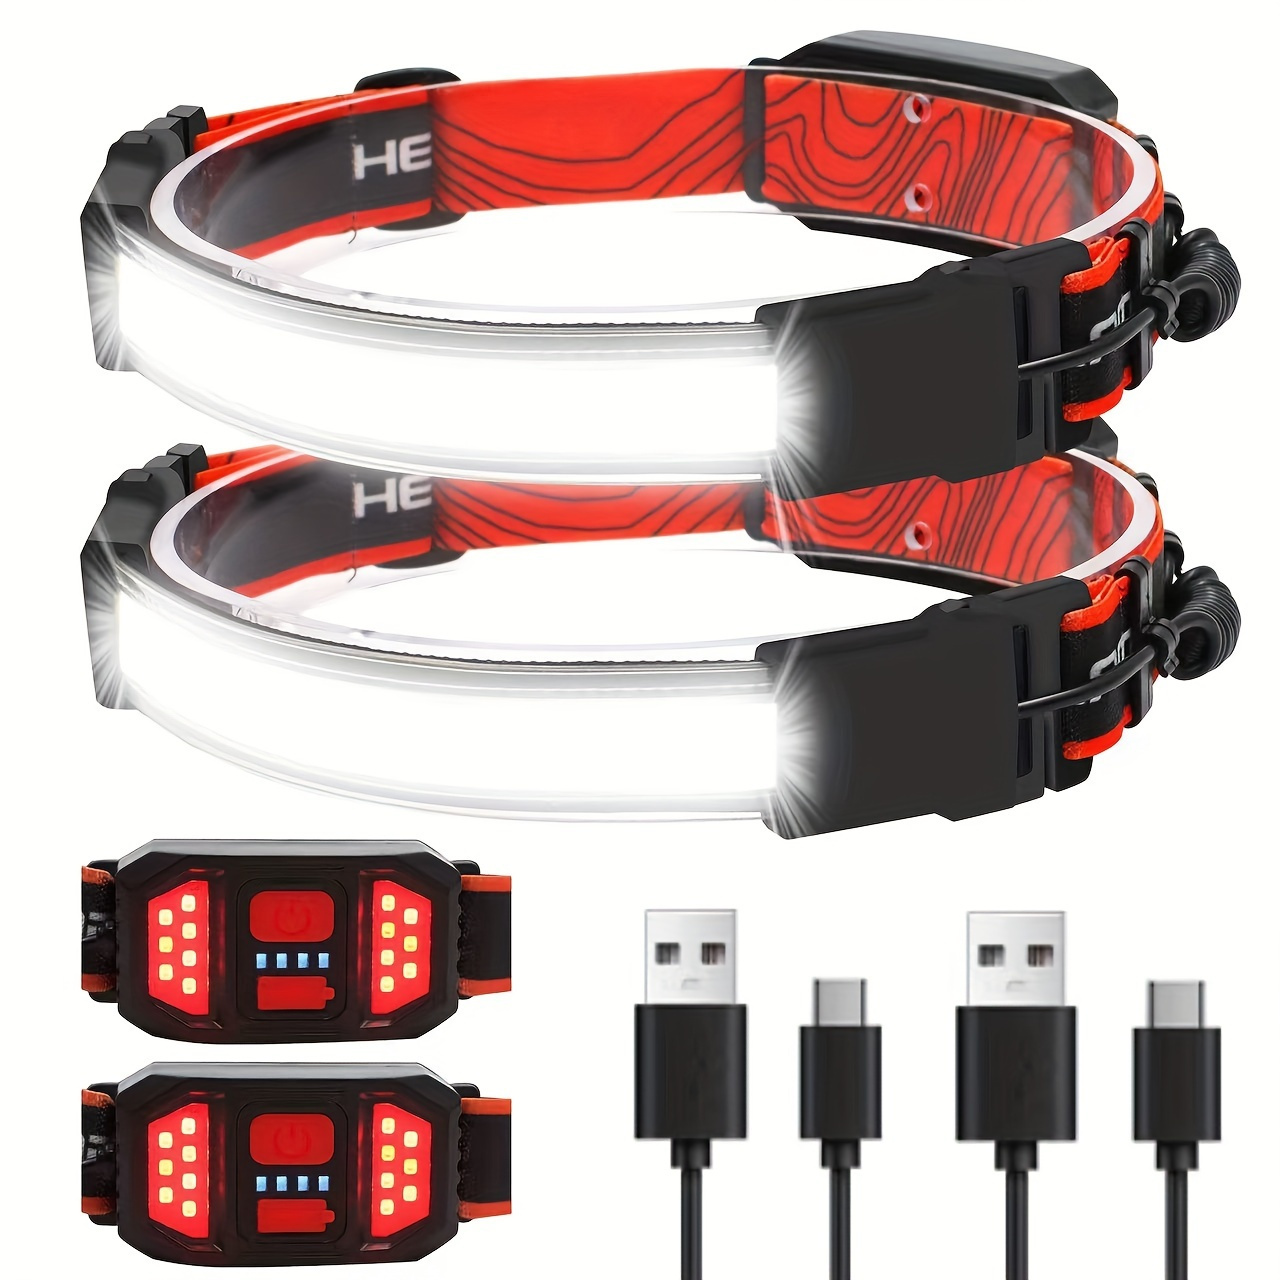 

Super Bright Strong Light Cob Headlamp, Usb Recharge Led Headlight For Outdoor